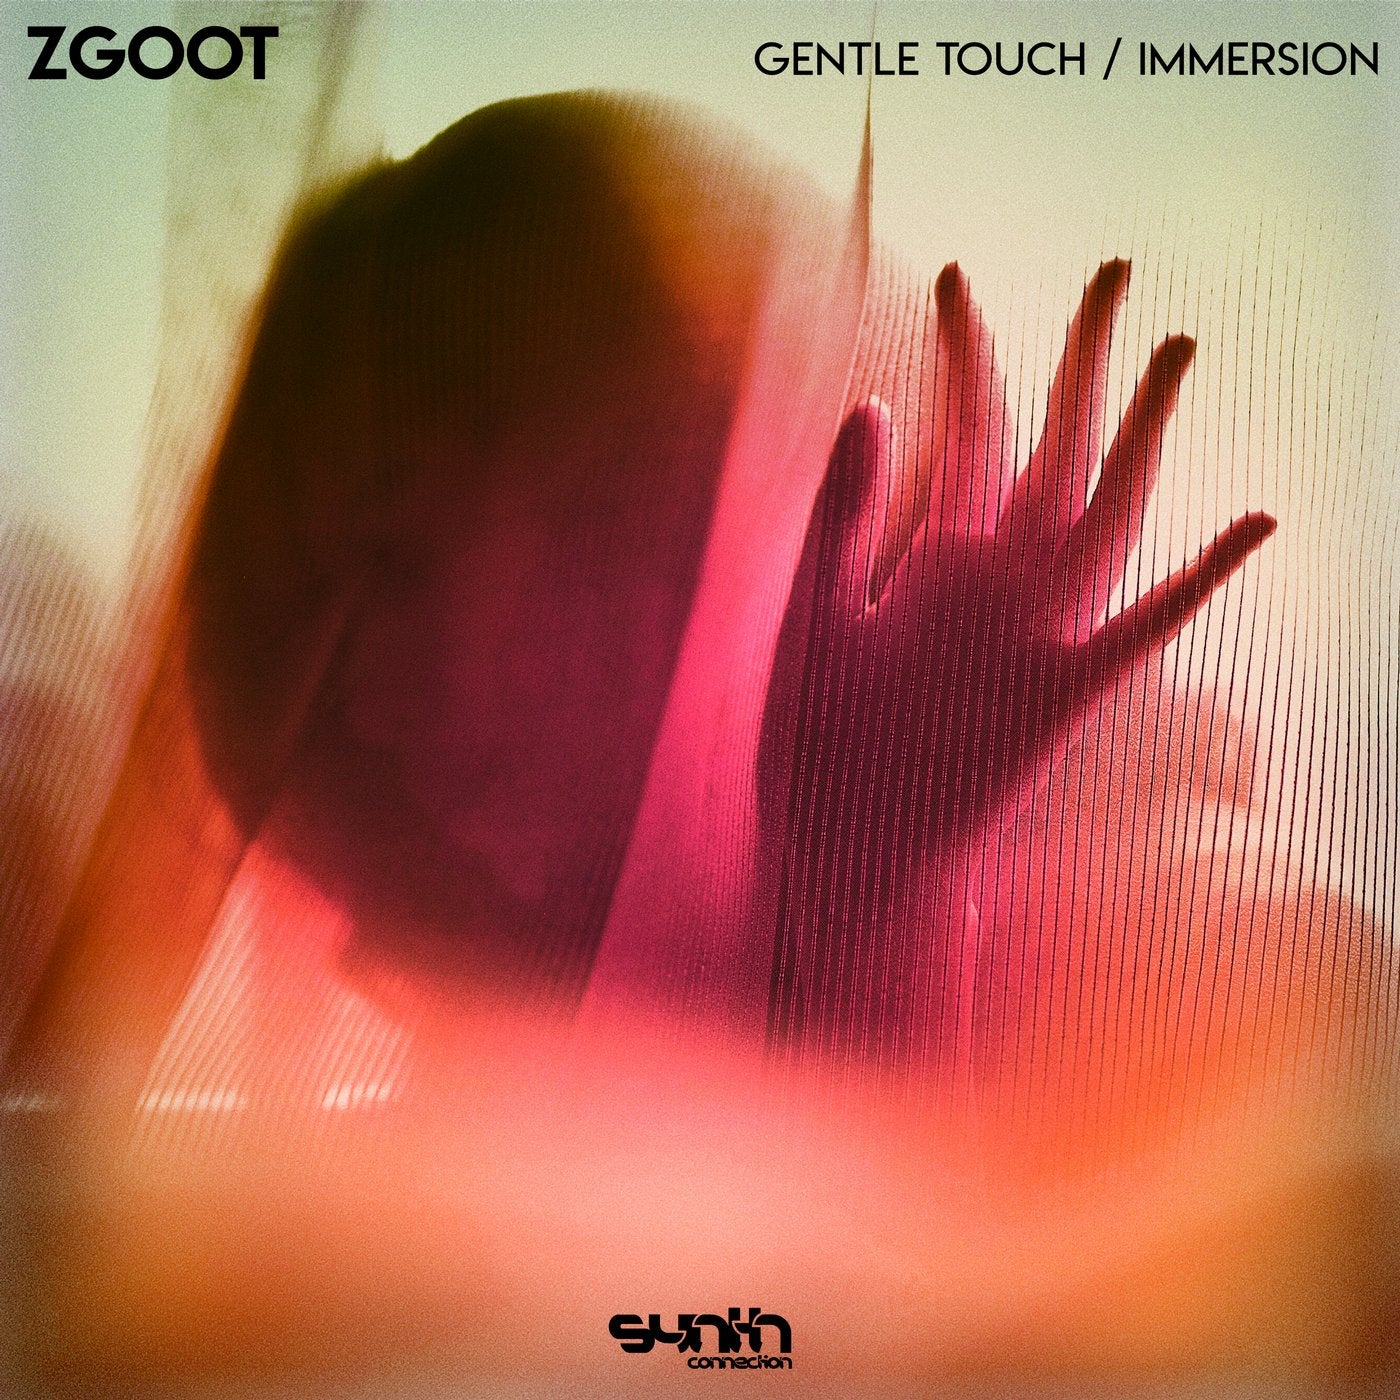 Gentle Touch / Immersion